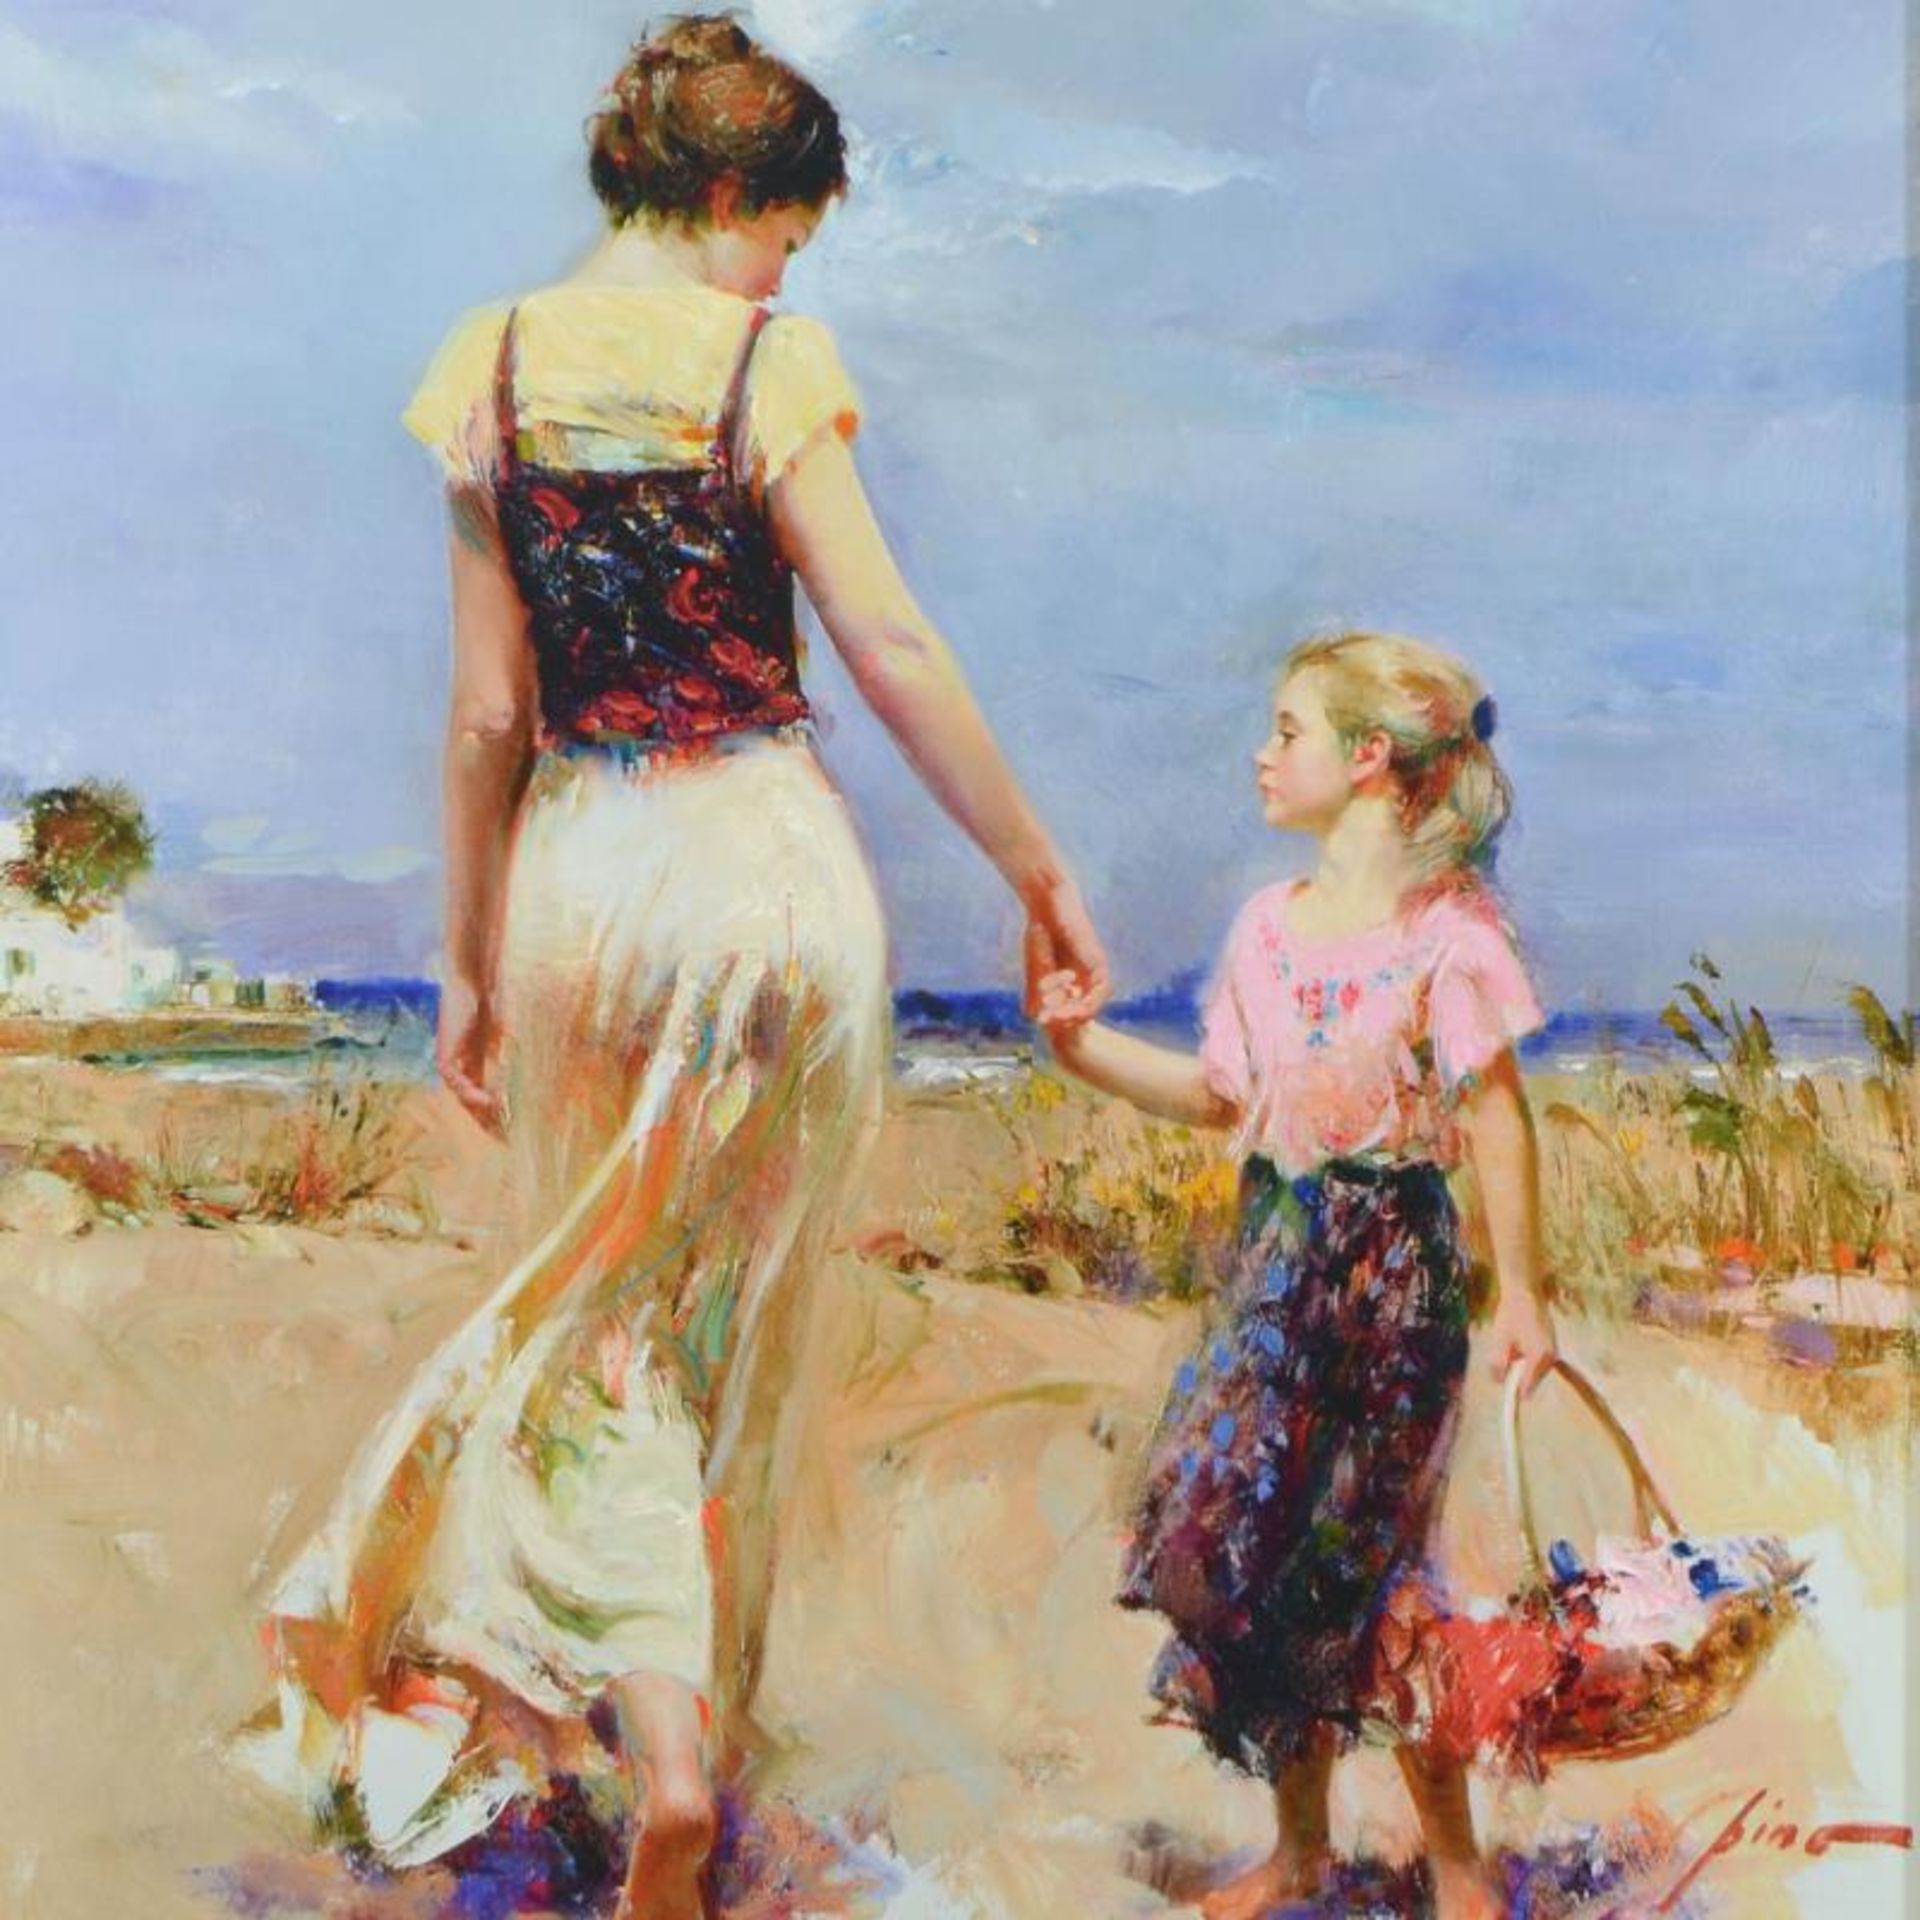 Pino (1939-2010), "Let's Go Home" Framed Limited Edition Artist-Embellished Gicl - Image 2 of 2